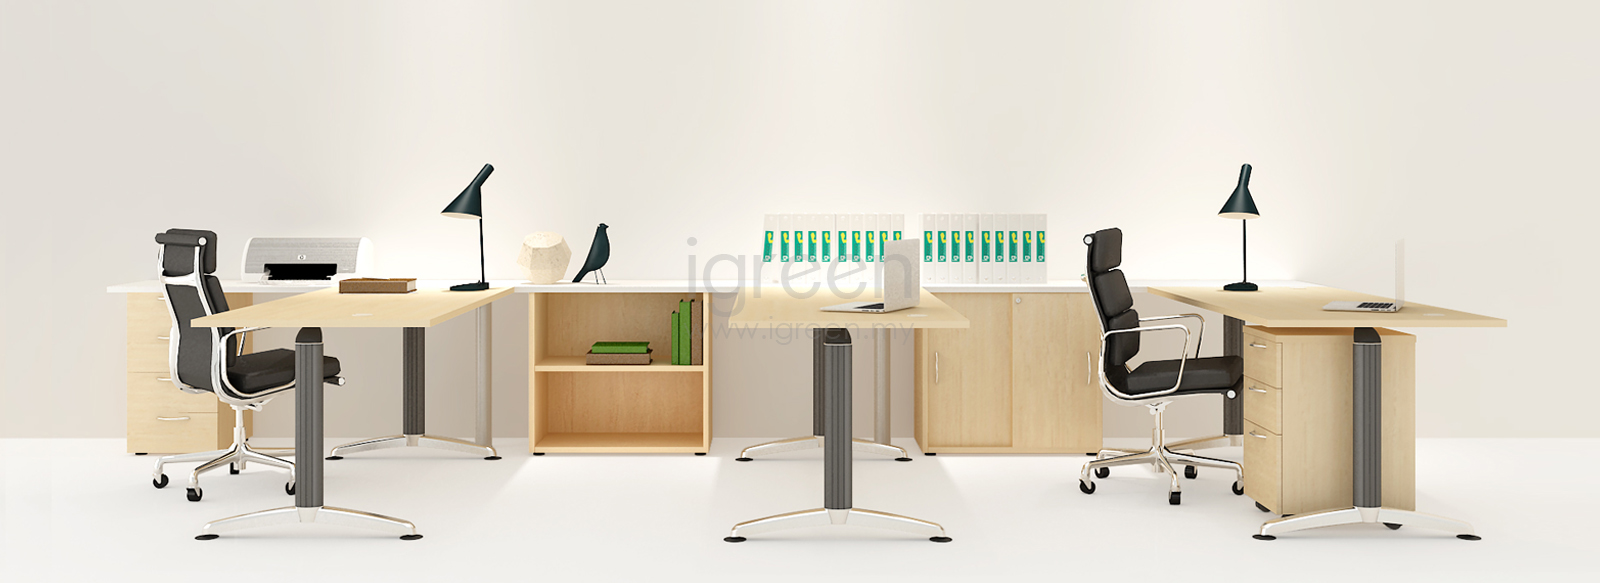 Tender Series Design Open Work Place Concept Malaysia